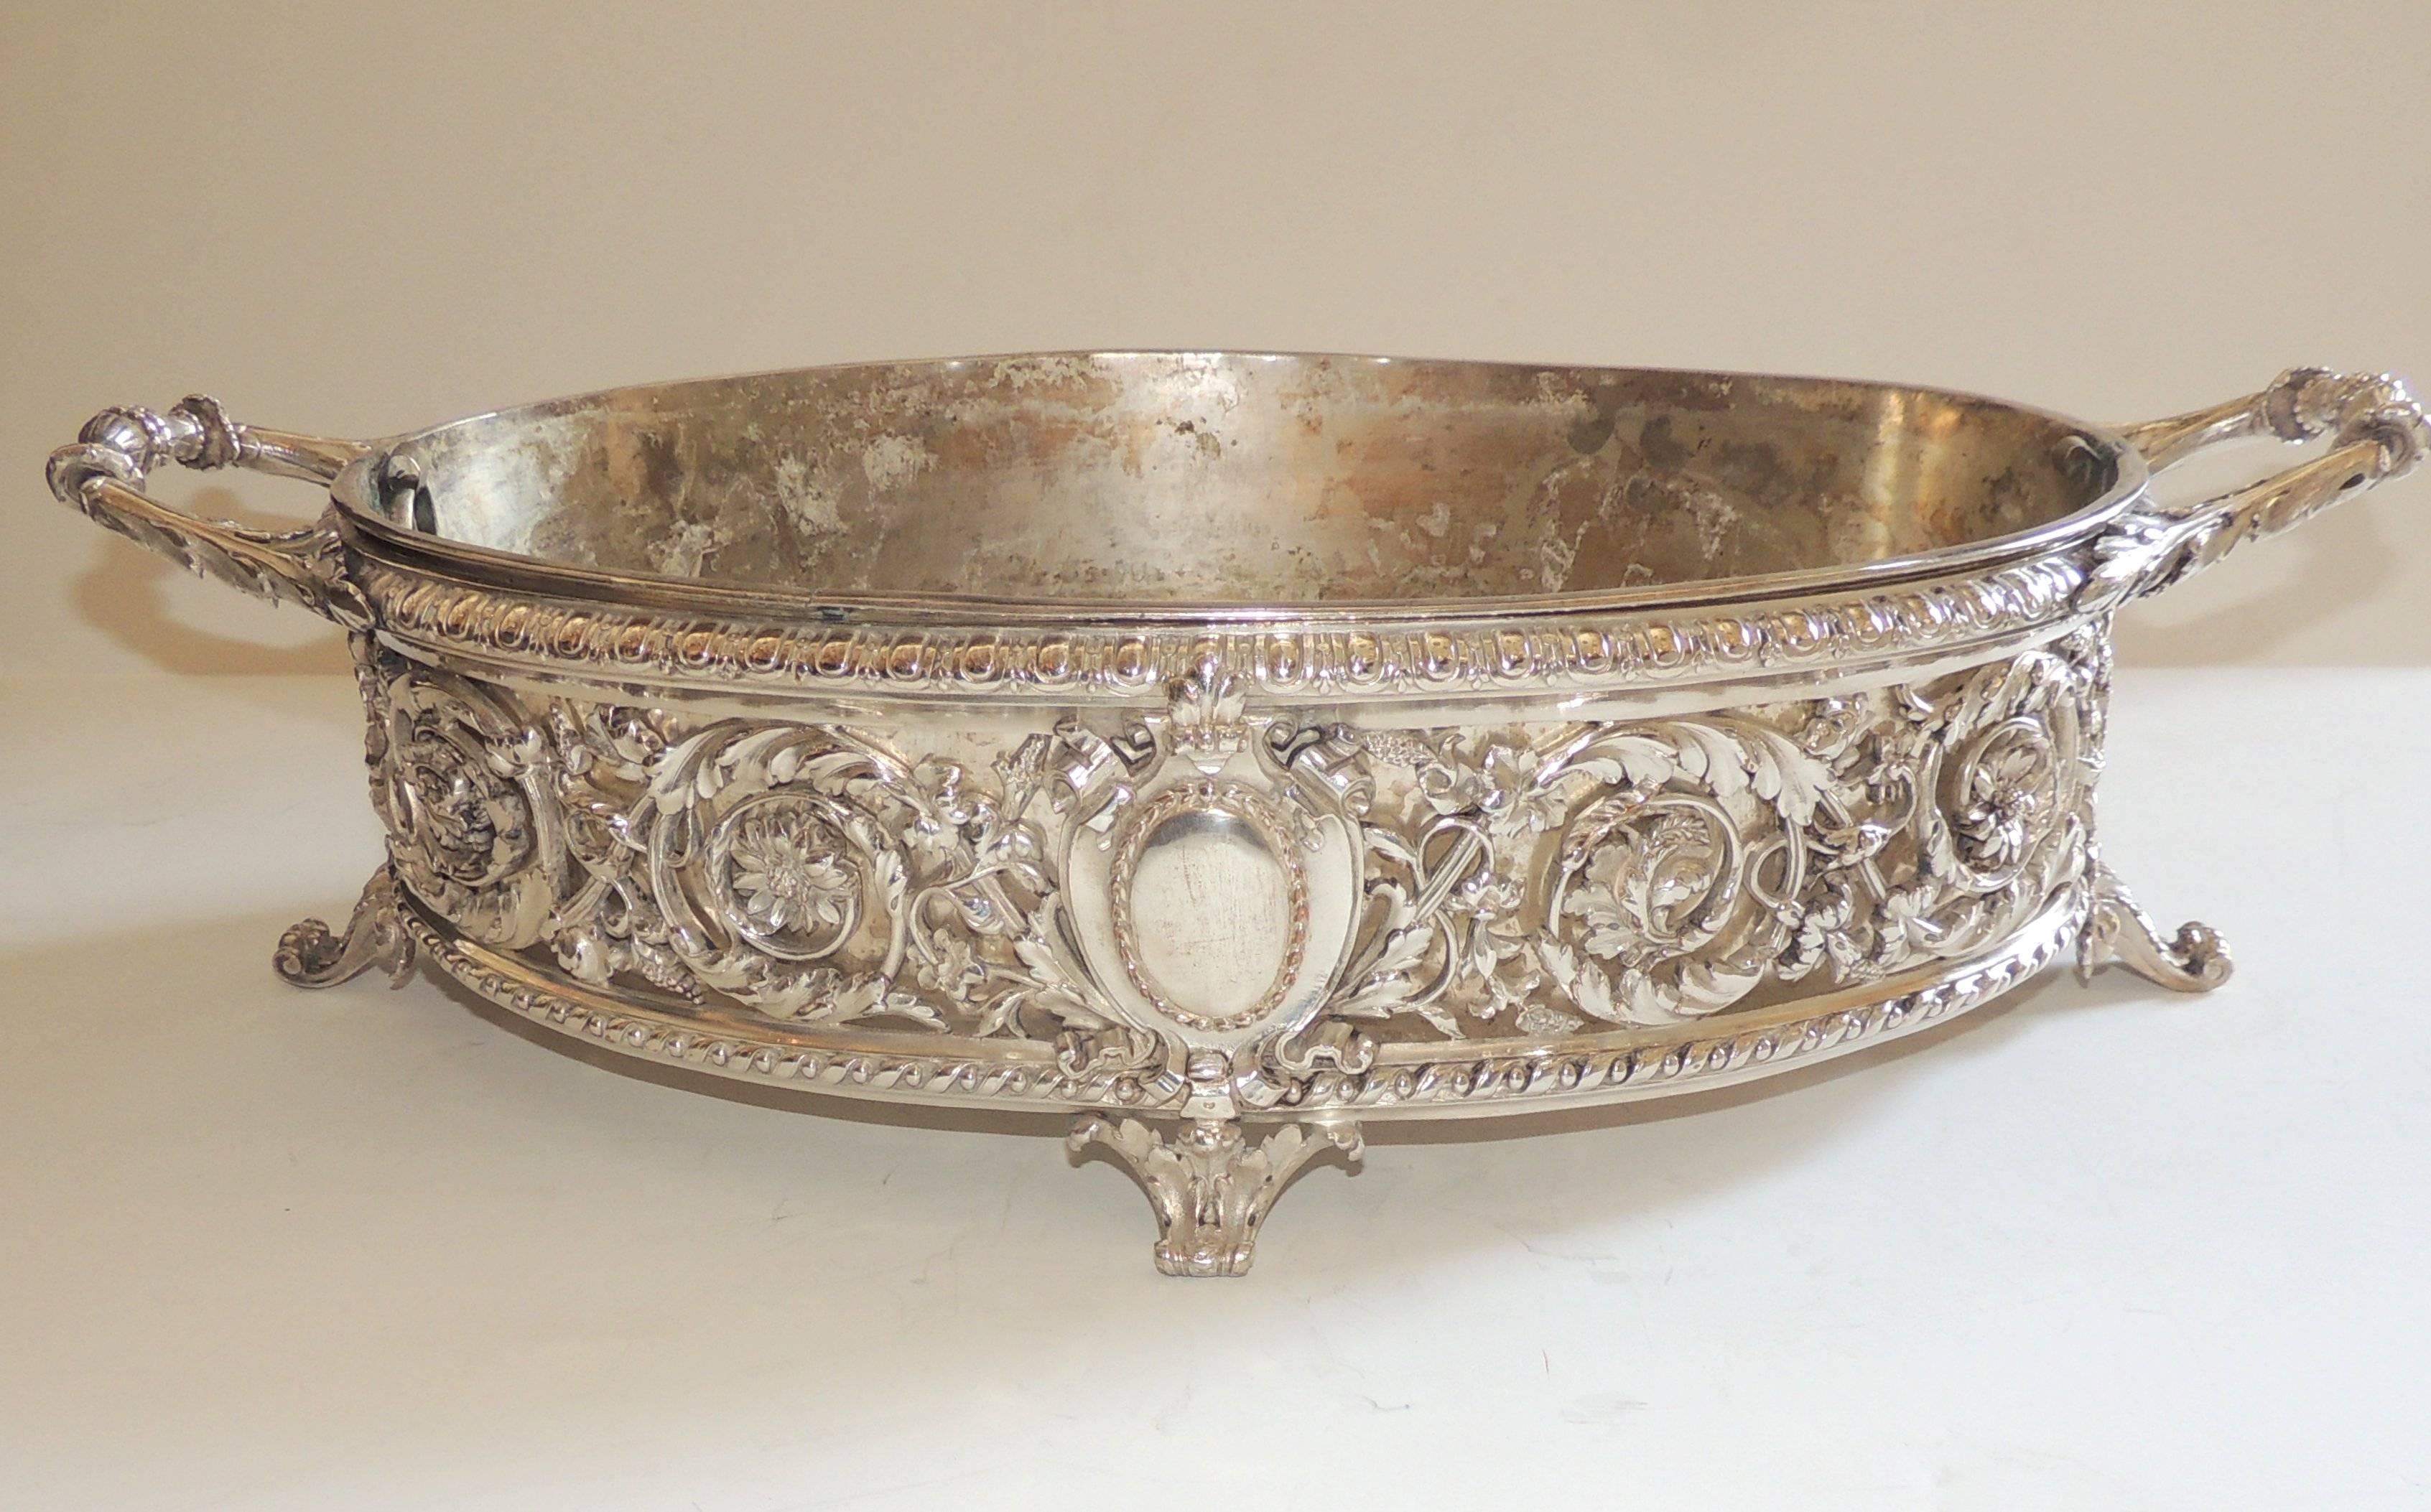 This Wonderful French silver plated centerpiece with insert Is by Christofle it is beautifully adorned with filigree pierced design and centered with a crest ending on either side with very fine detailed handles & feet. 

Marked Christofle